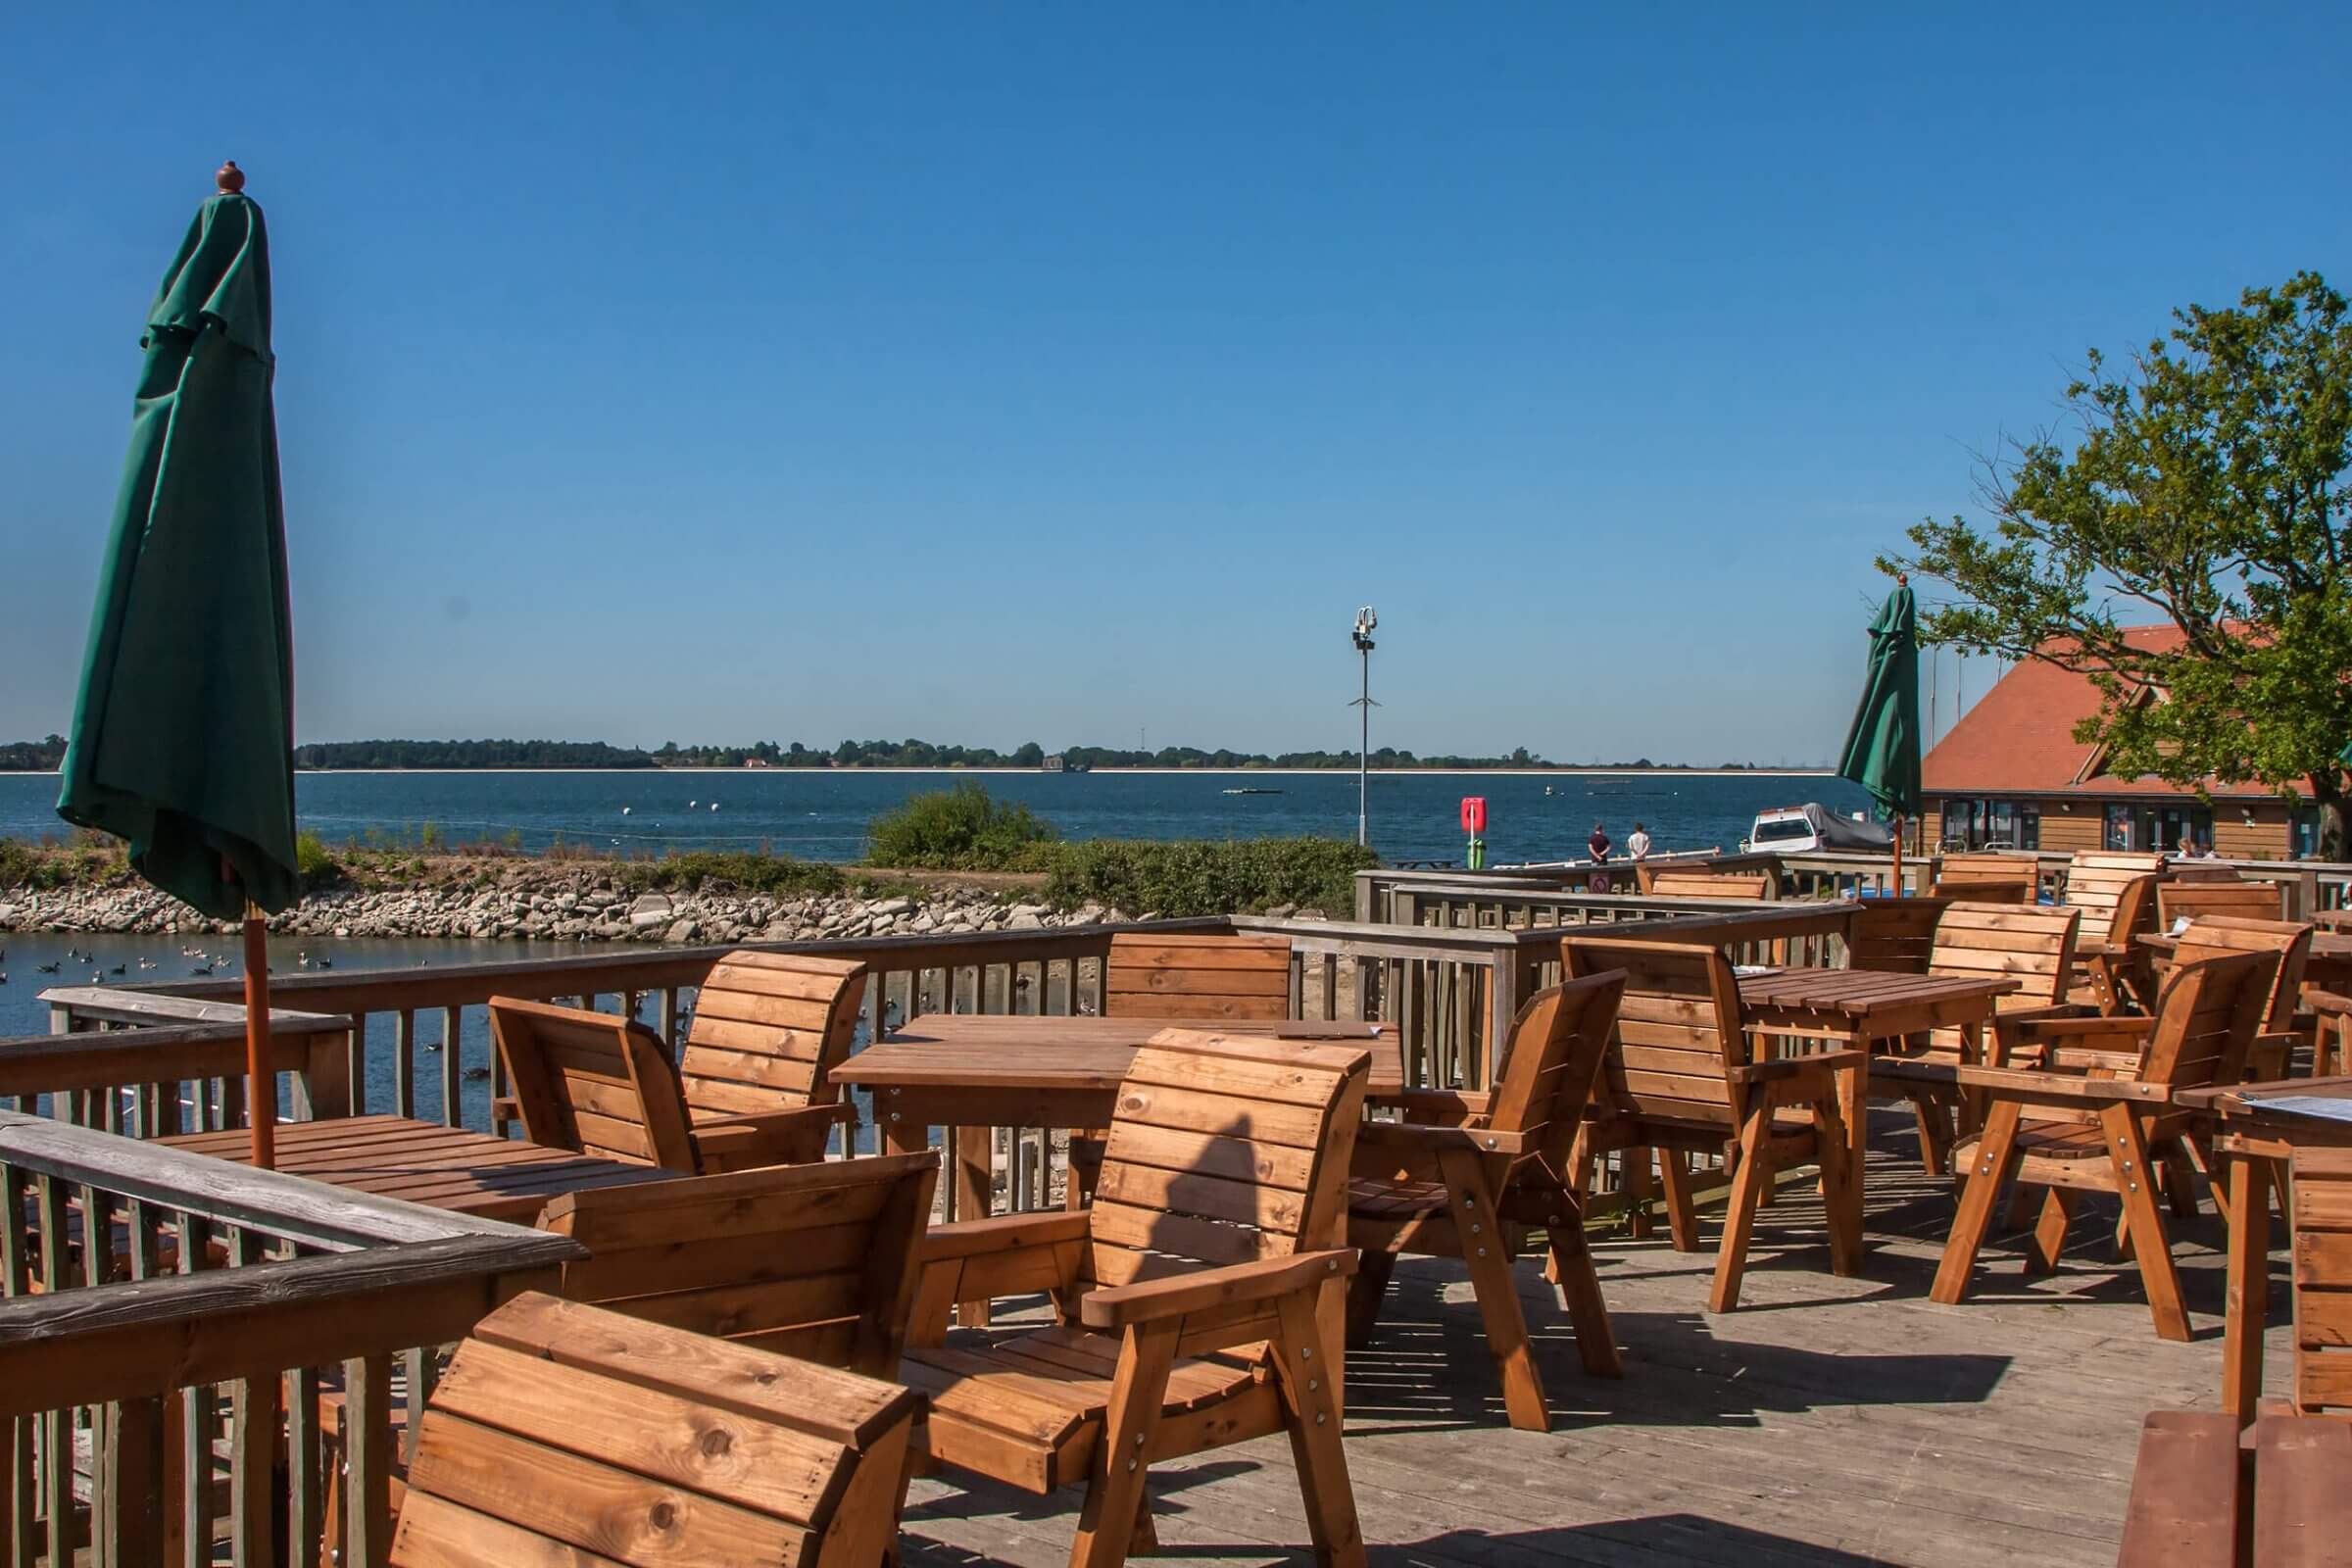 Photo of the outdoor seating at the Cafe on the Water. It over looks the reservoir and the clear blue sky above.